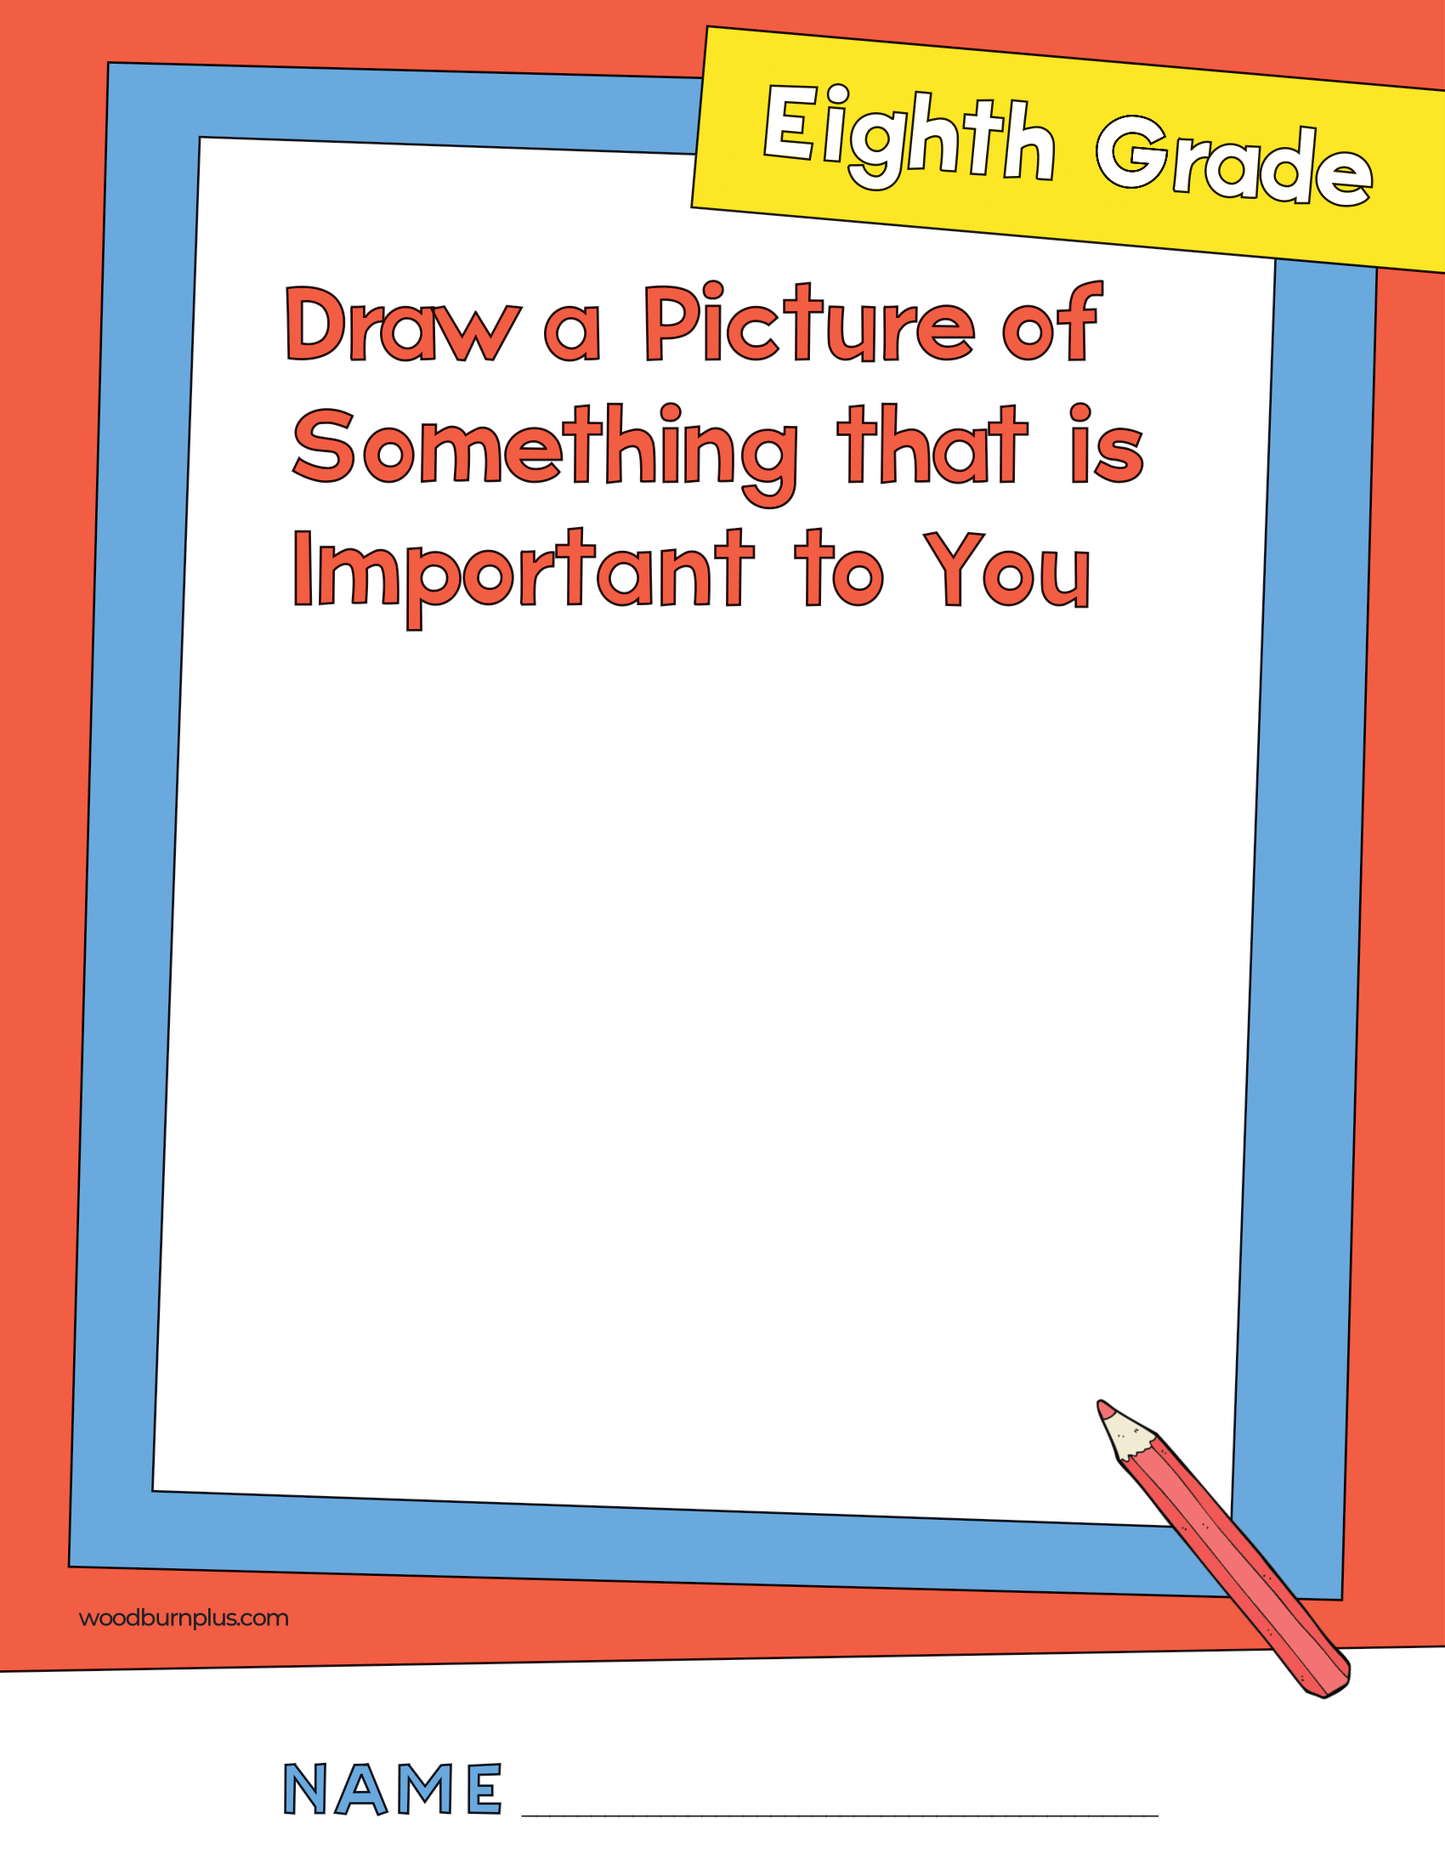 Eighth Grade - Draw Something Important To You